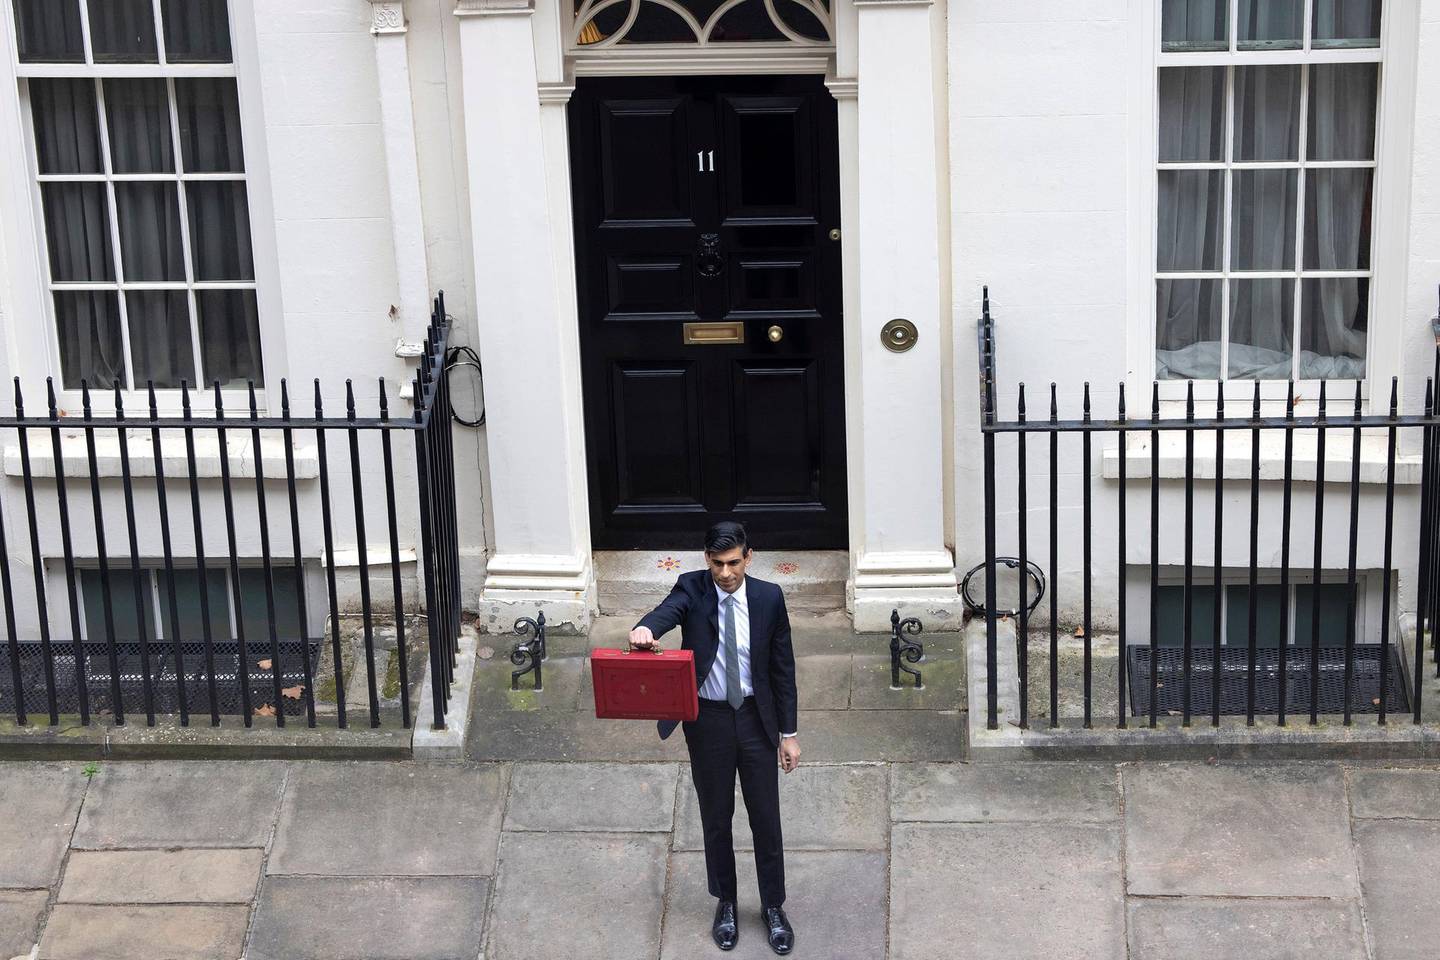 03/03/2021. London, United Kingdom. Chancellor of the Exchequer Rishi Sunak leaves Downing Street to deliver his annual budget in parliament . 11 Downing Street. Picture by Simon Dawson / No 10 Downing Street